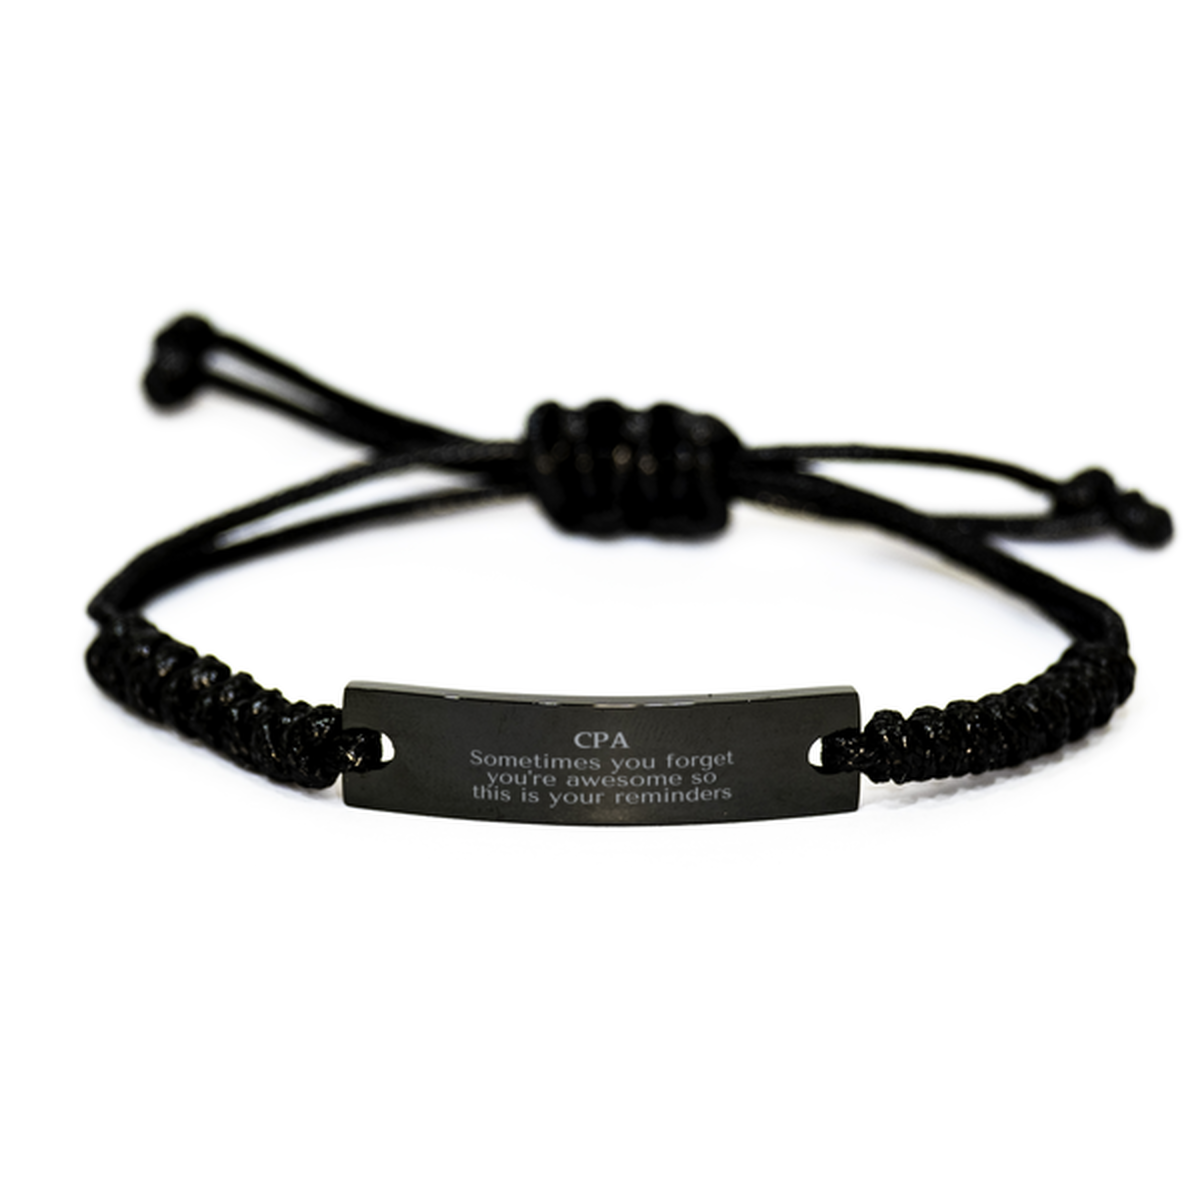 Sentimental CPA Black Rope Bracelet, CPA Sometimes you forget you're awesome so this is your reminders, Graduation Christmas Birthday Gifts for CPA, Men, Women, Coworkers